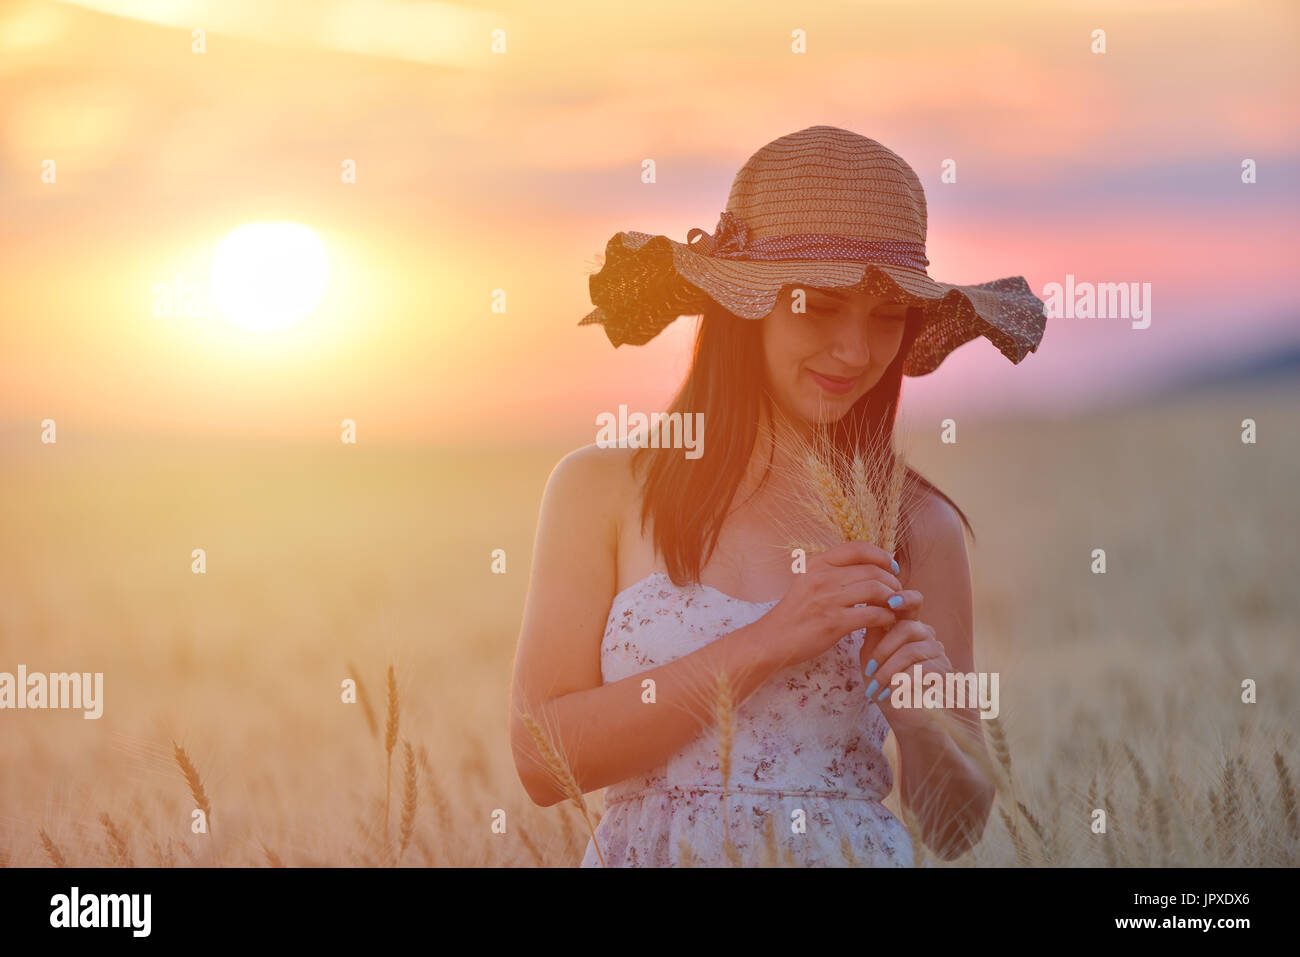 Closeup portrait of smiling young caucasian woman in wheat field. Cheerful young beautiful woman enjoying a day in natural environment at sunset Stock Photo